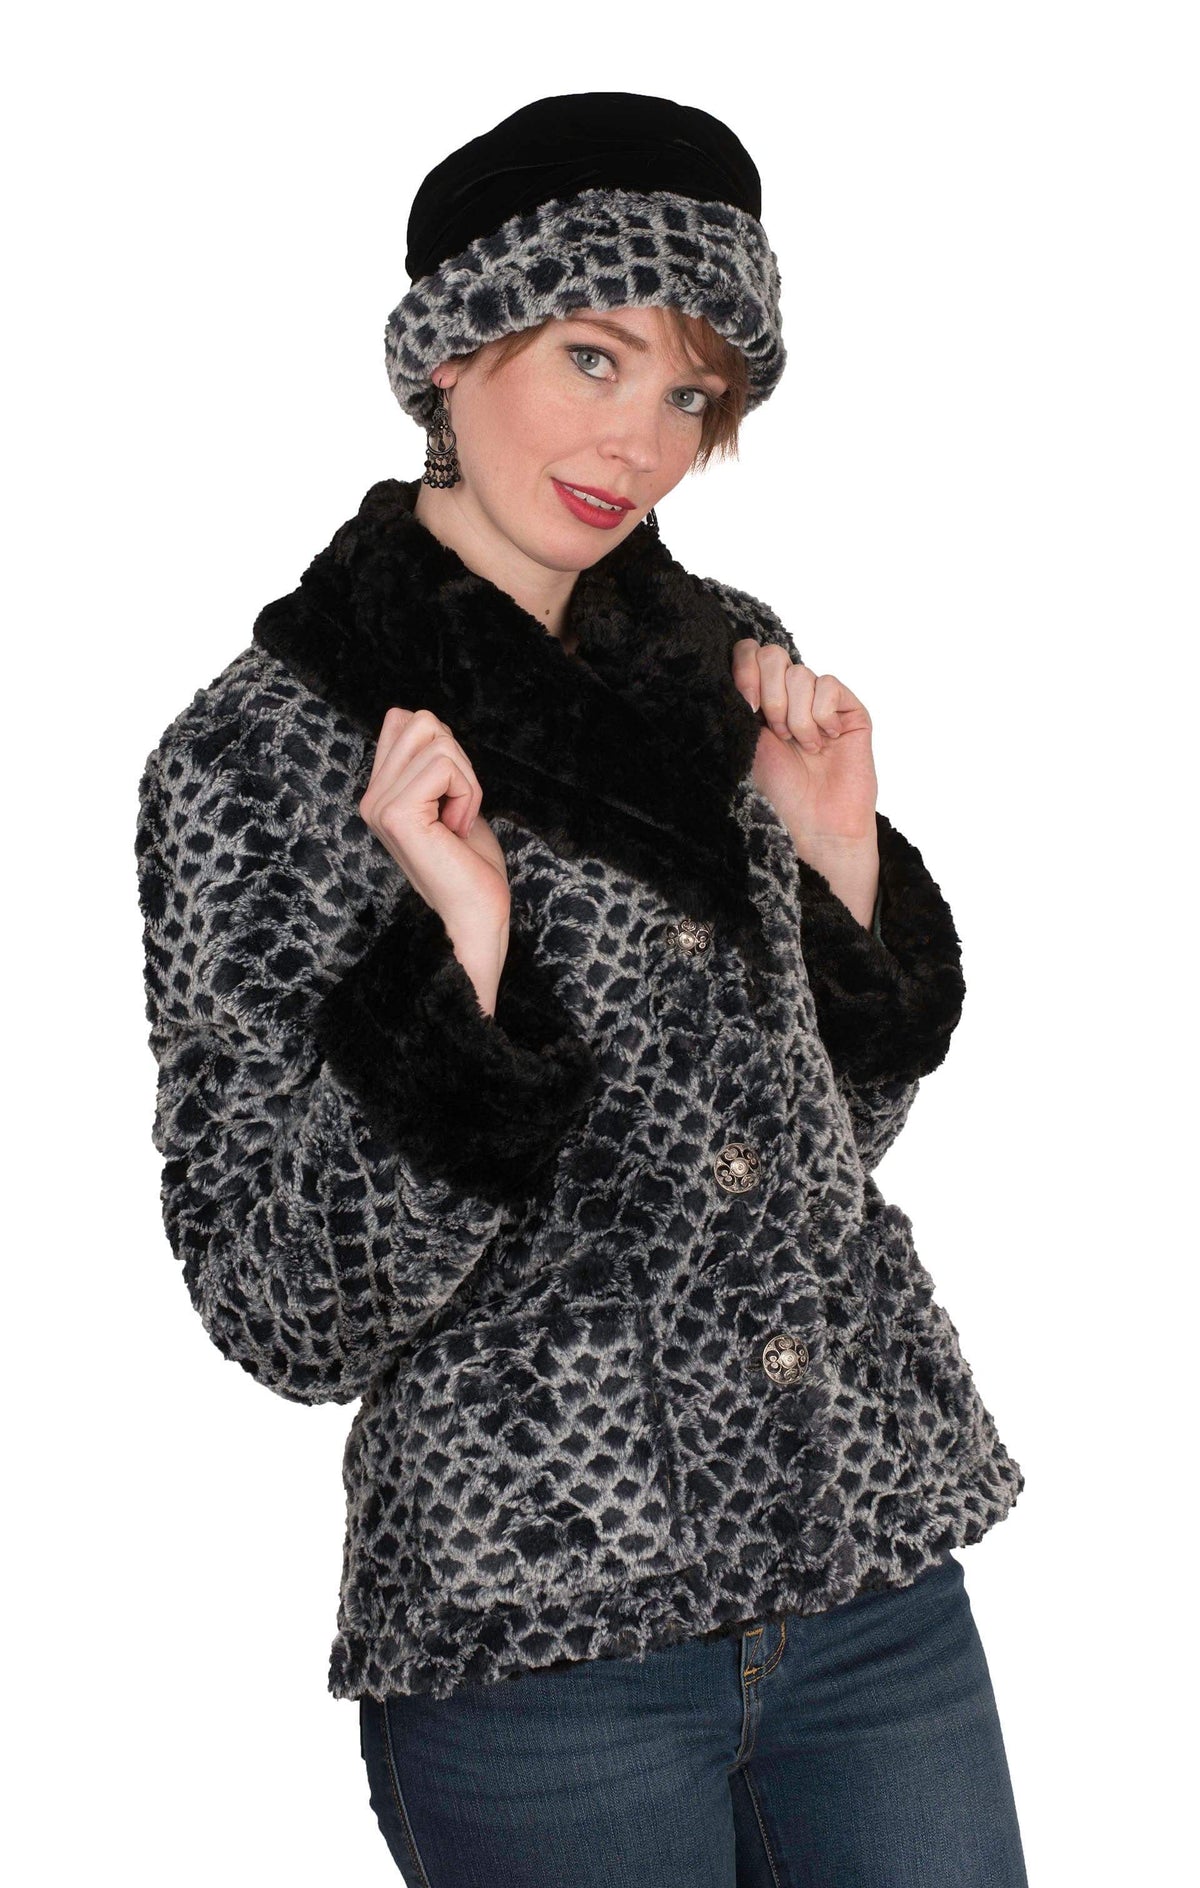 Norma Jean Coat, Reversible - Rosebud Brown Faux Fur with Cuddly Fur in Chocolate (Only Small Left!)